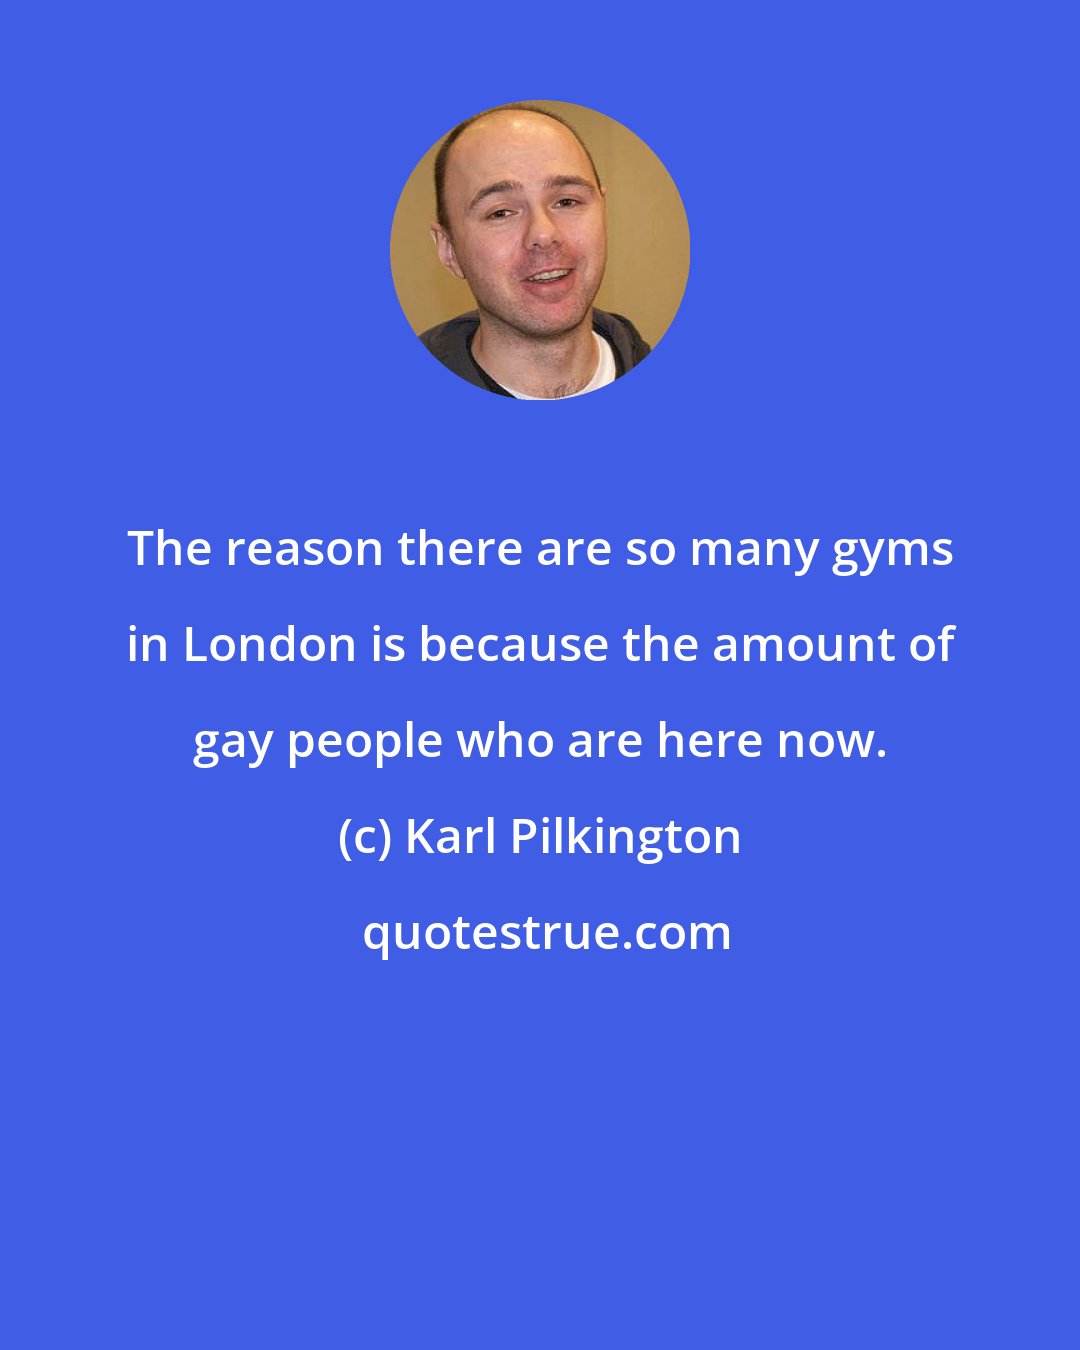 Karl Pilkington: The reason there are so many gyms in London is because the amount of gay people who are here now.